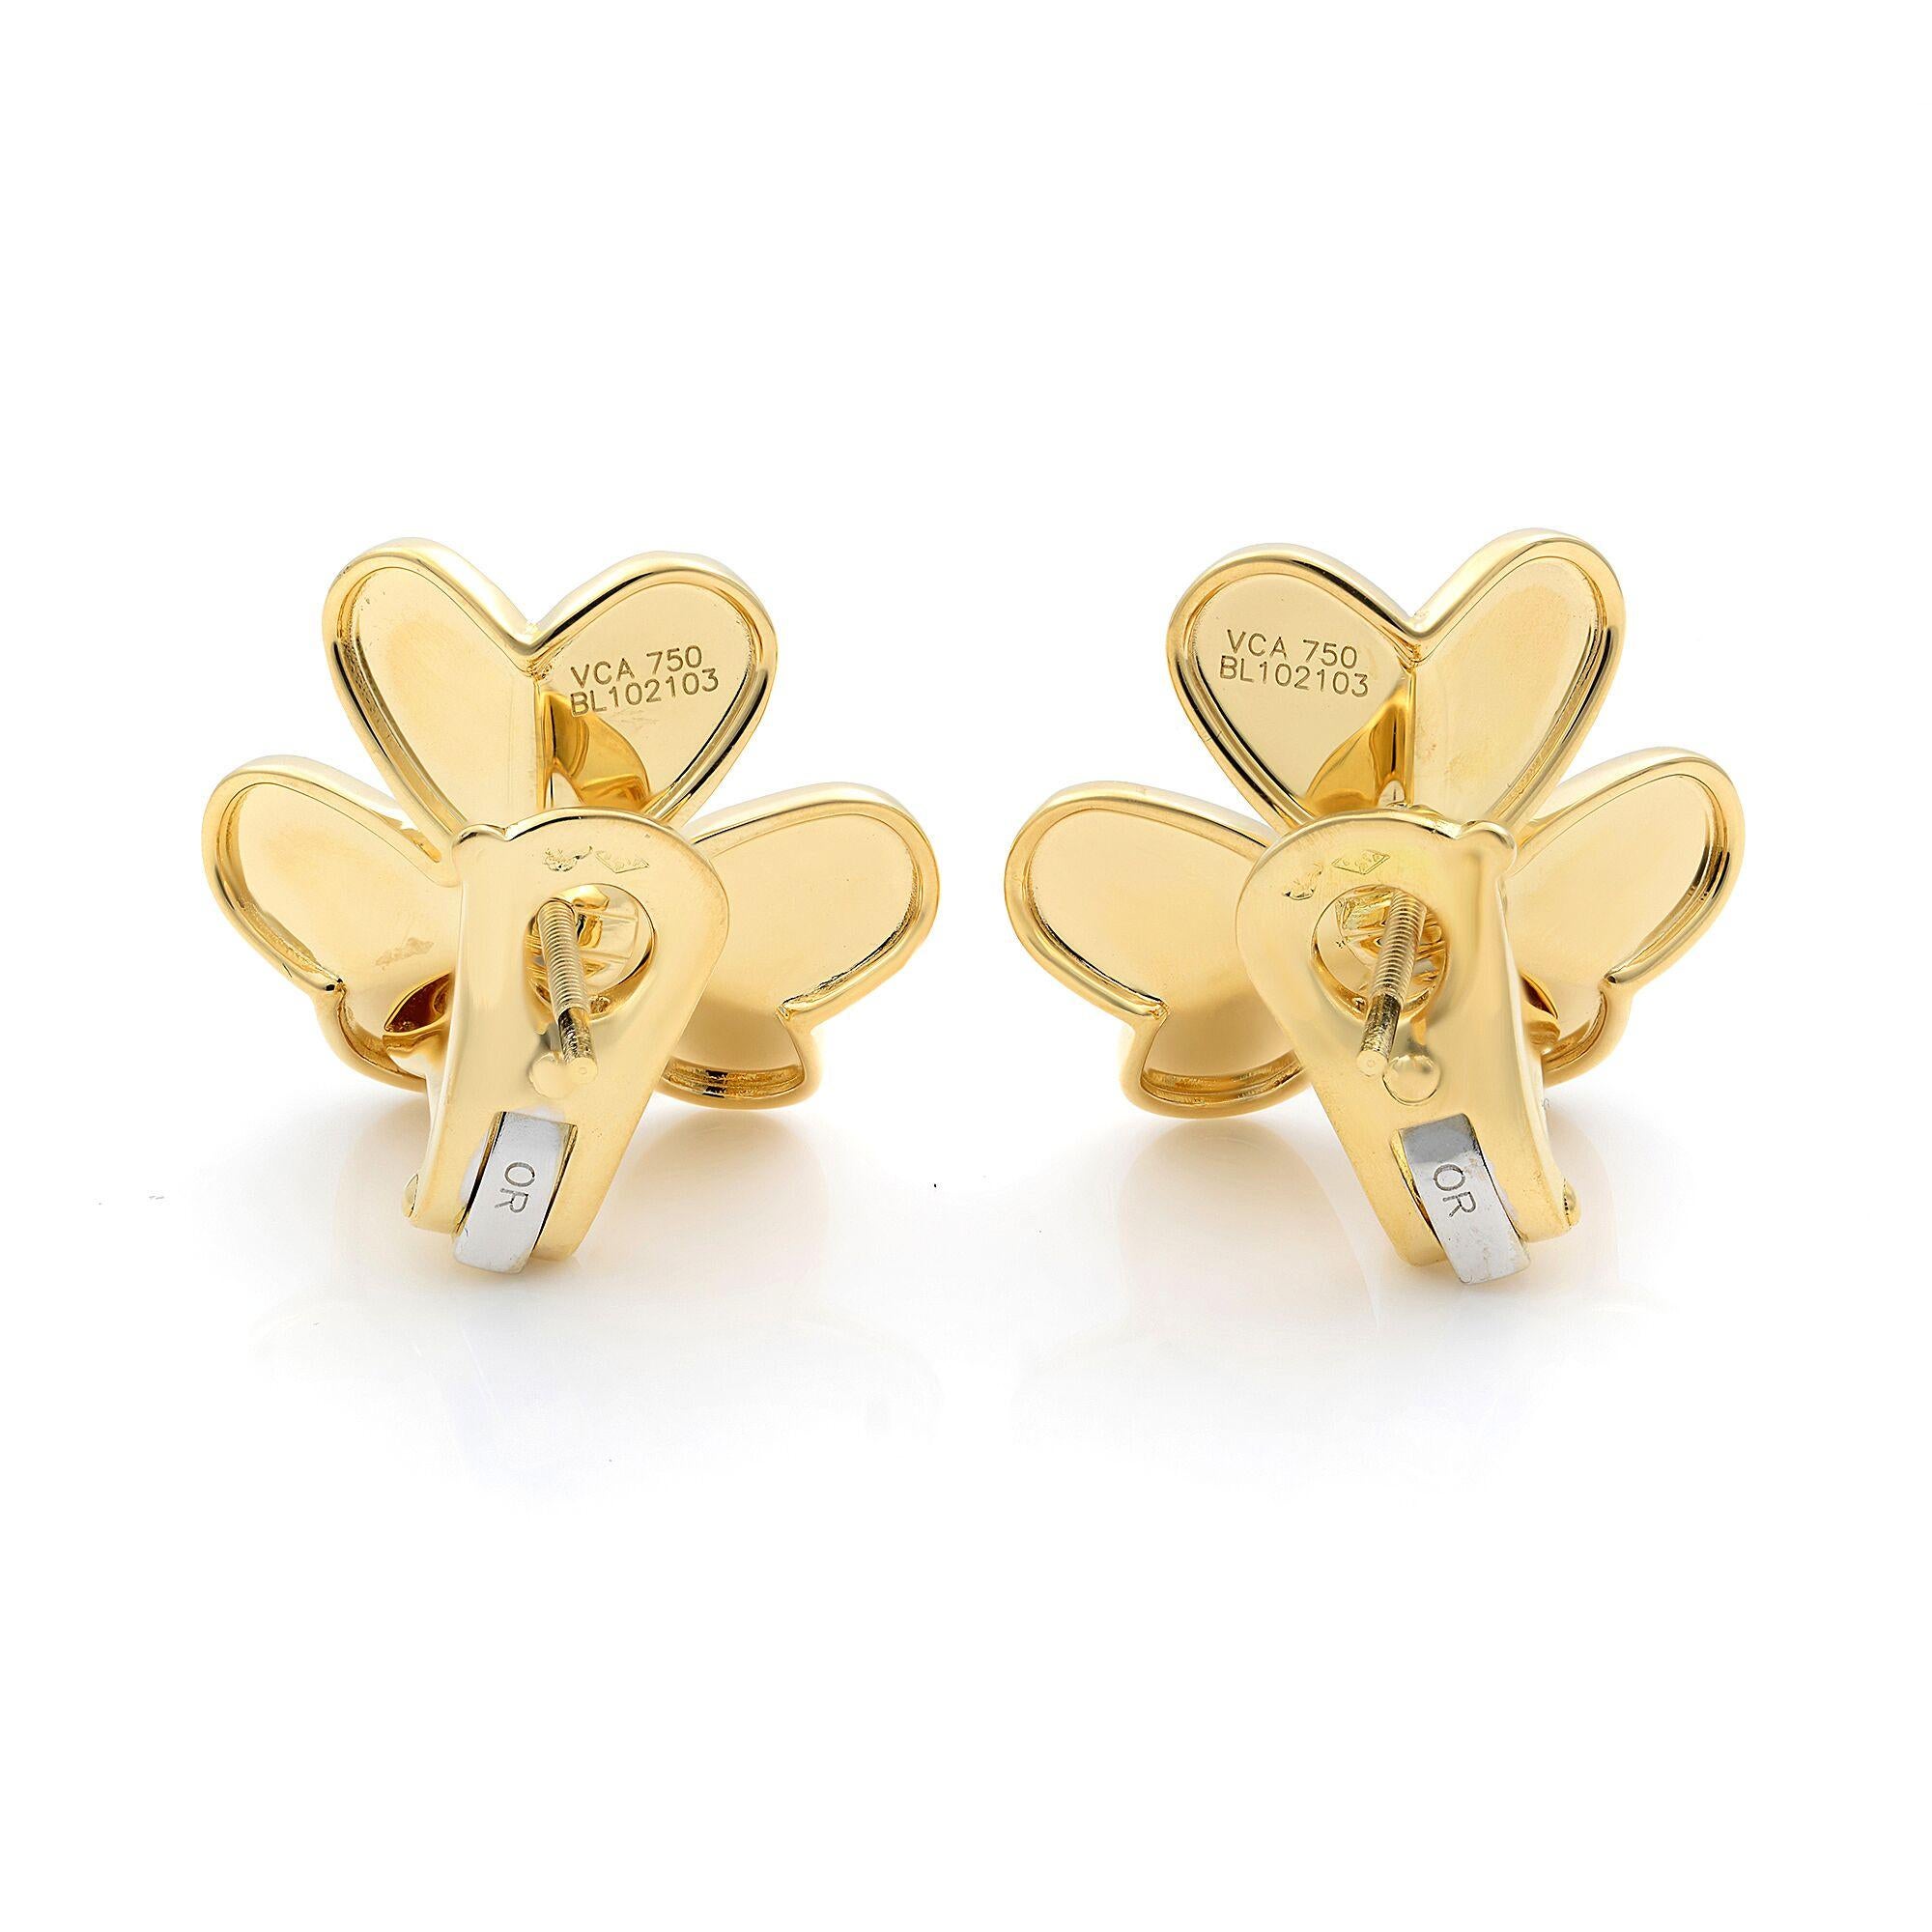 Van Cleef & Arpels 18K Yellow Gold & Diamonds Frivole Large Model Earrings. Set with 6 round cut diamonds totaling in 0.32 carats, D-F color and IF -VVS clarity. Earring Size: 20mm. These earrings stand out with their graphic and airy aesthetic.